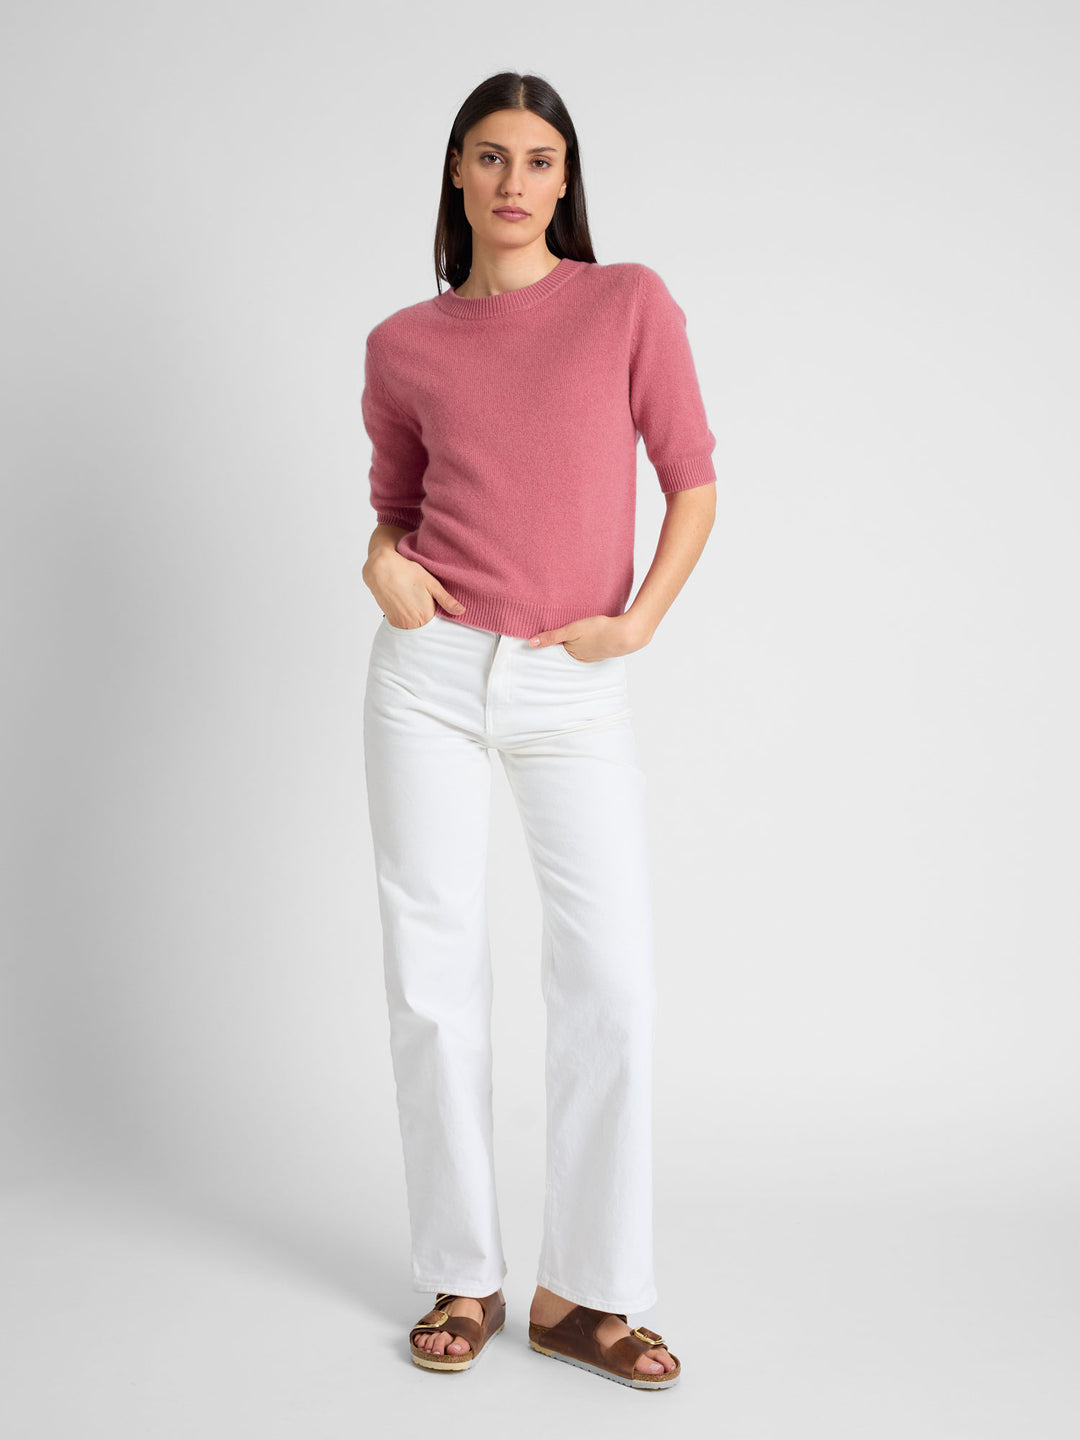 Short sleeved cashmere sweater "Aase" in 100% pure cashmere. Scandinavian design by Kashmina. Color: Pink berry.